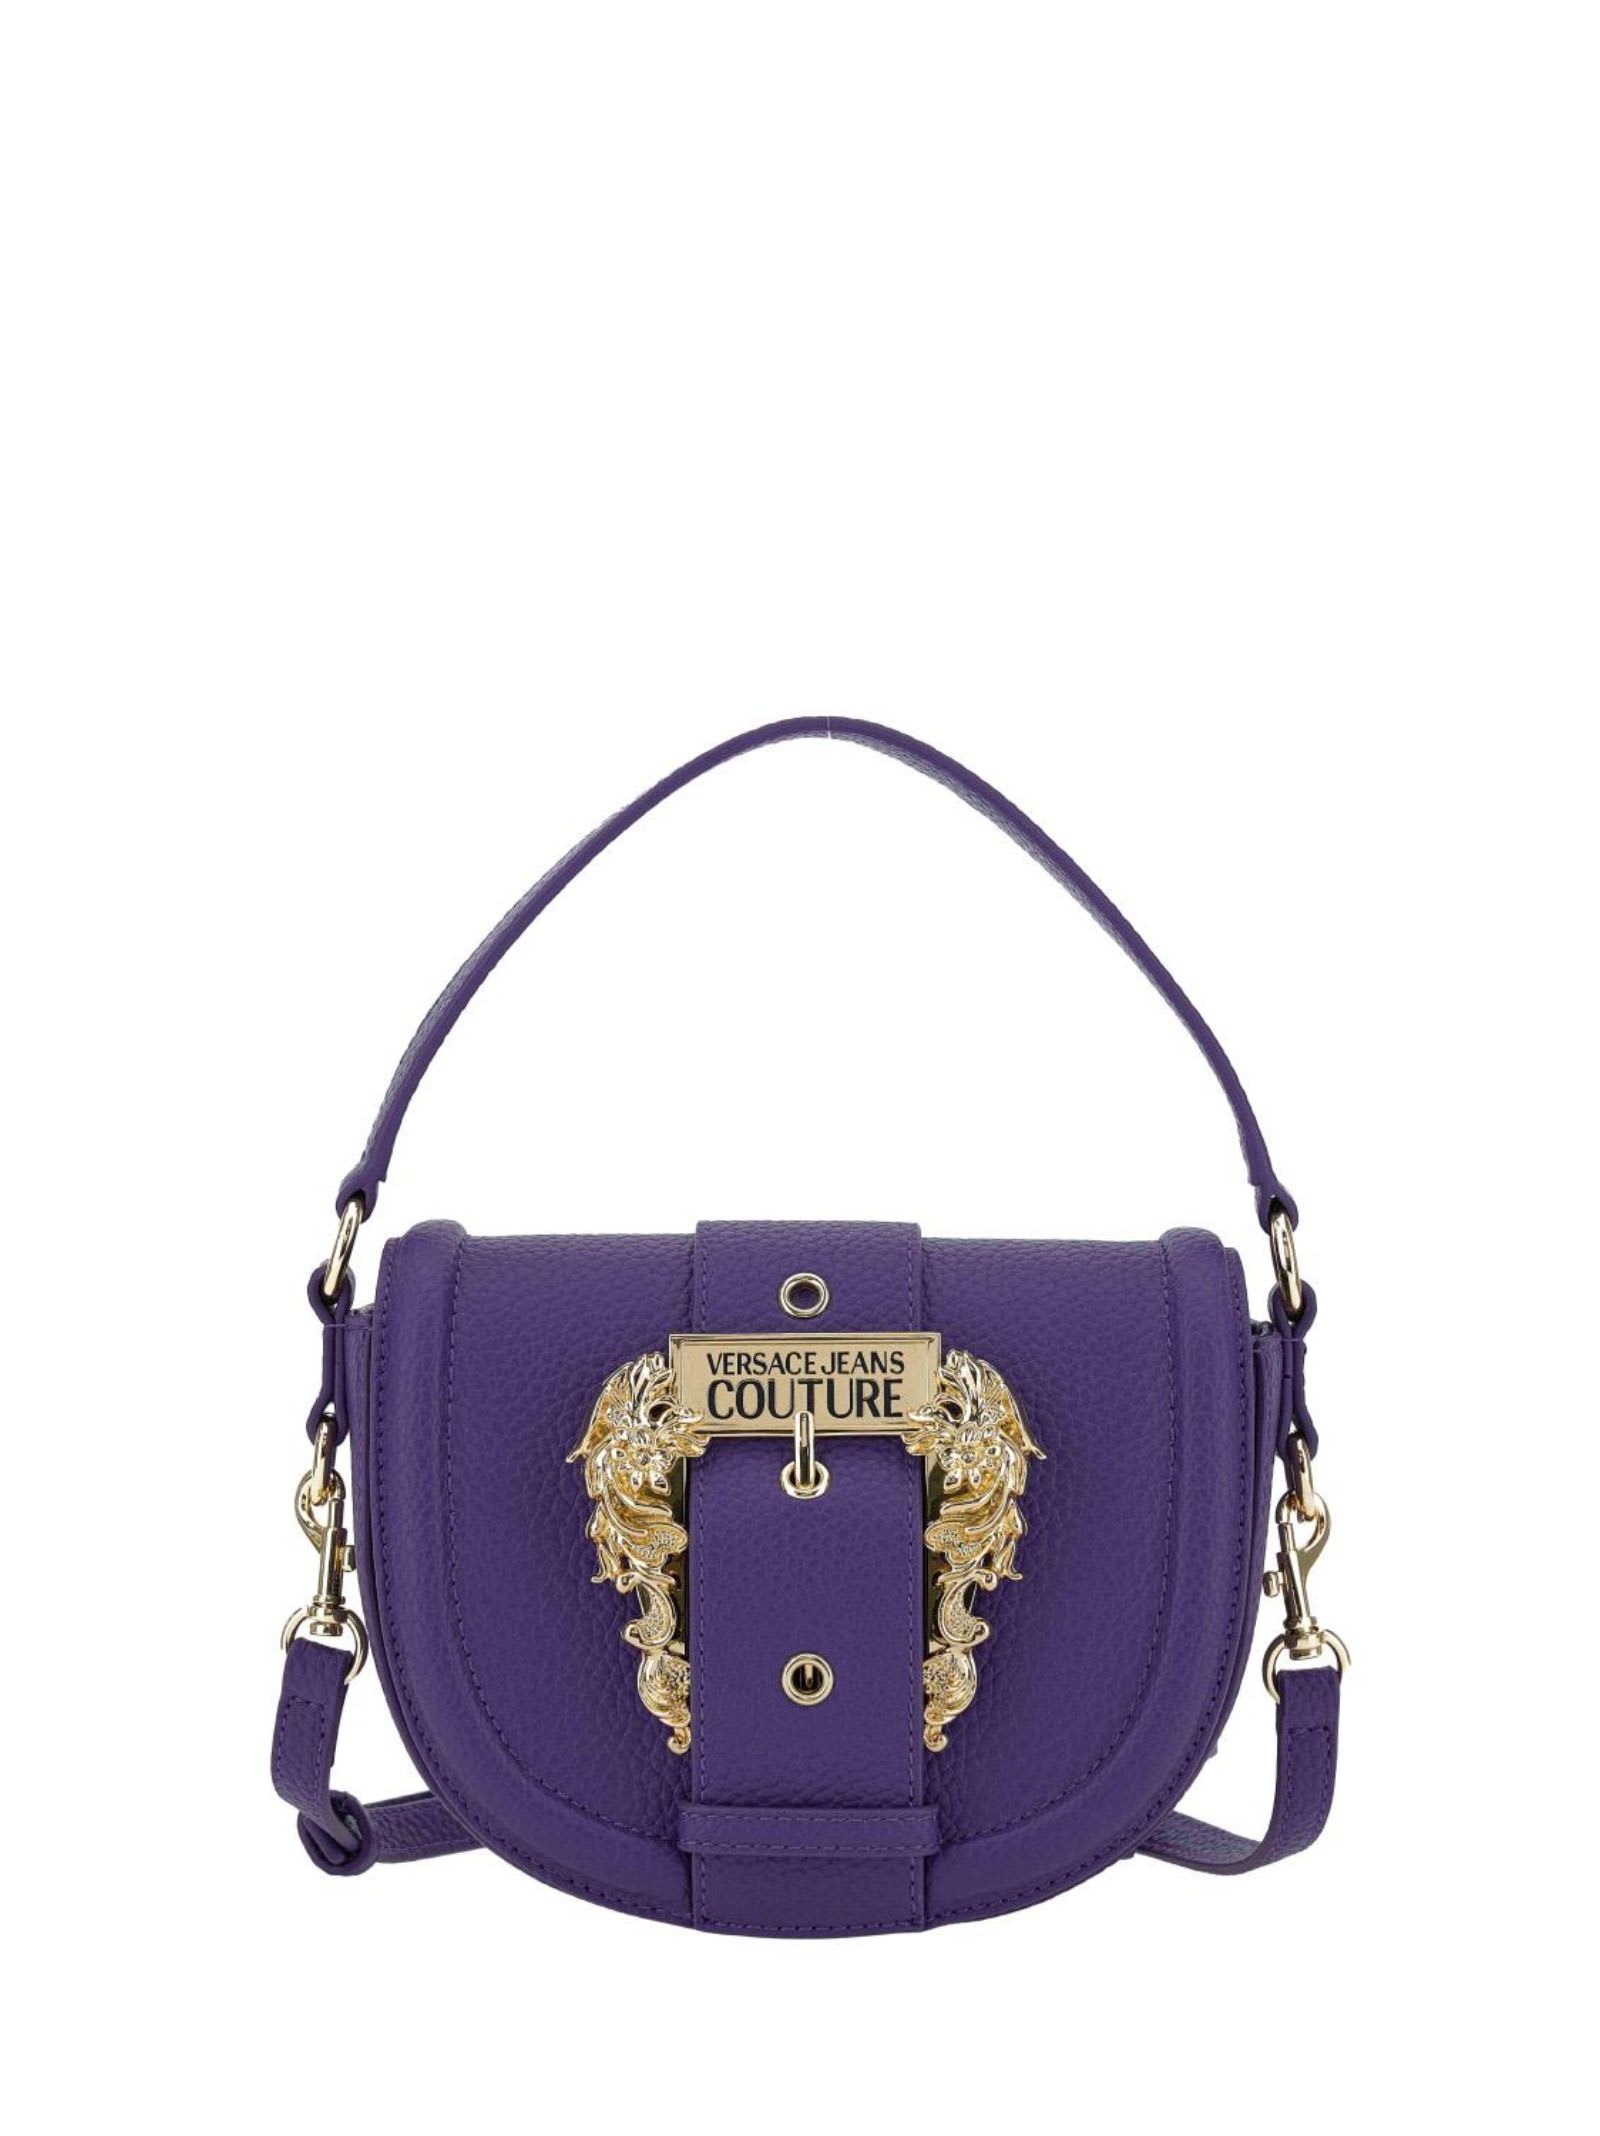 Shop Versace Jeans Couture Bag In Purple